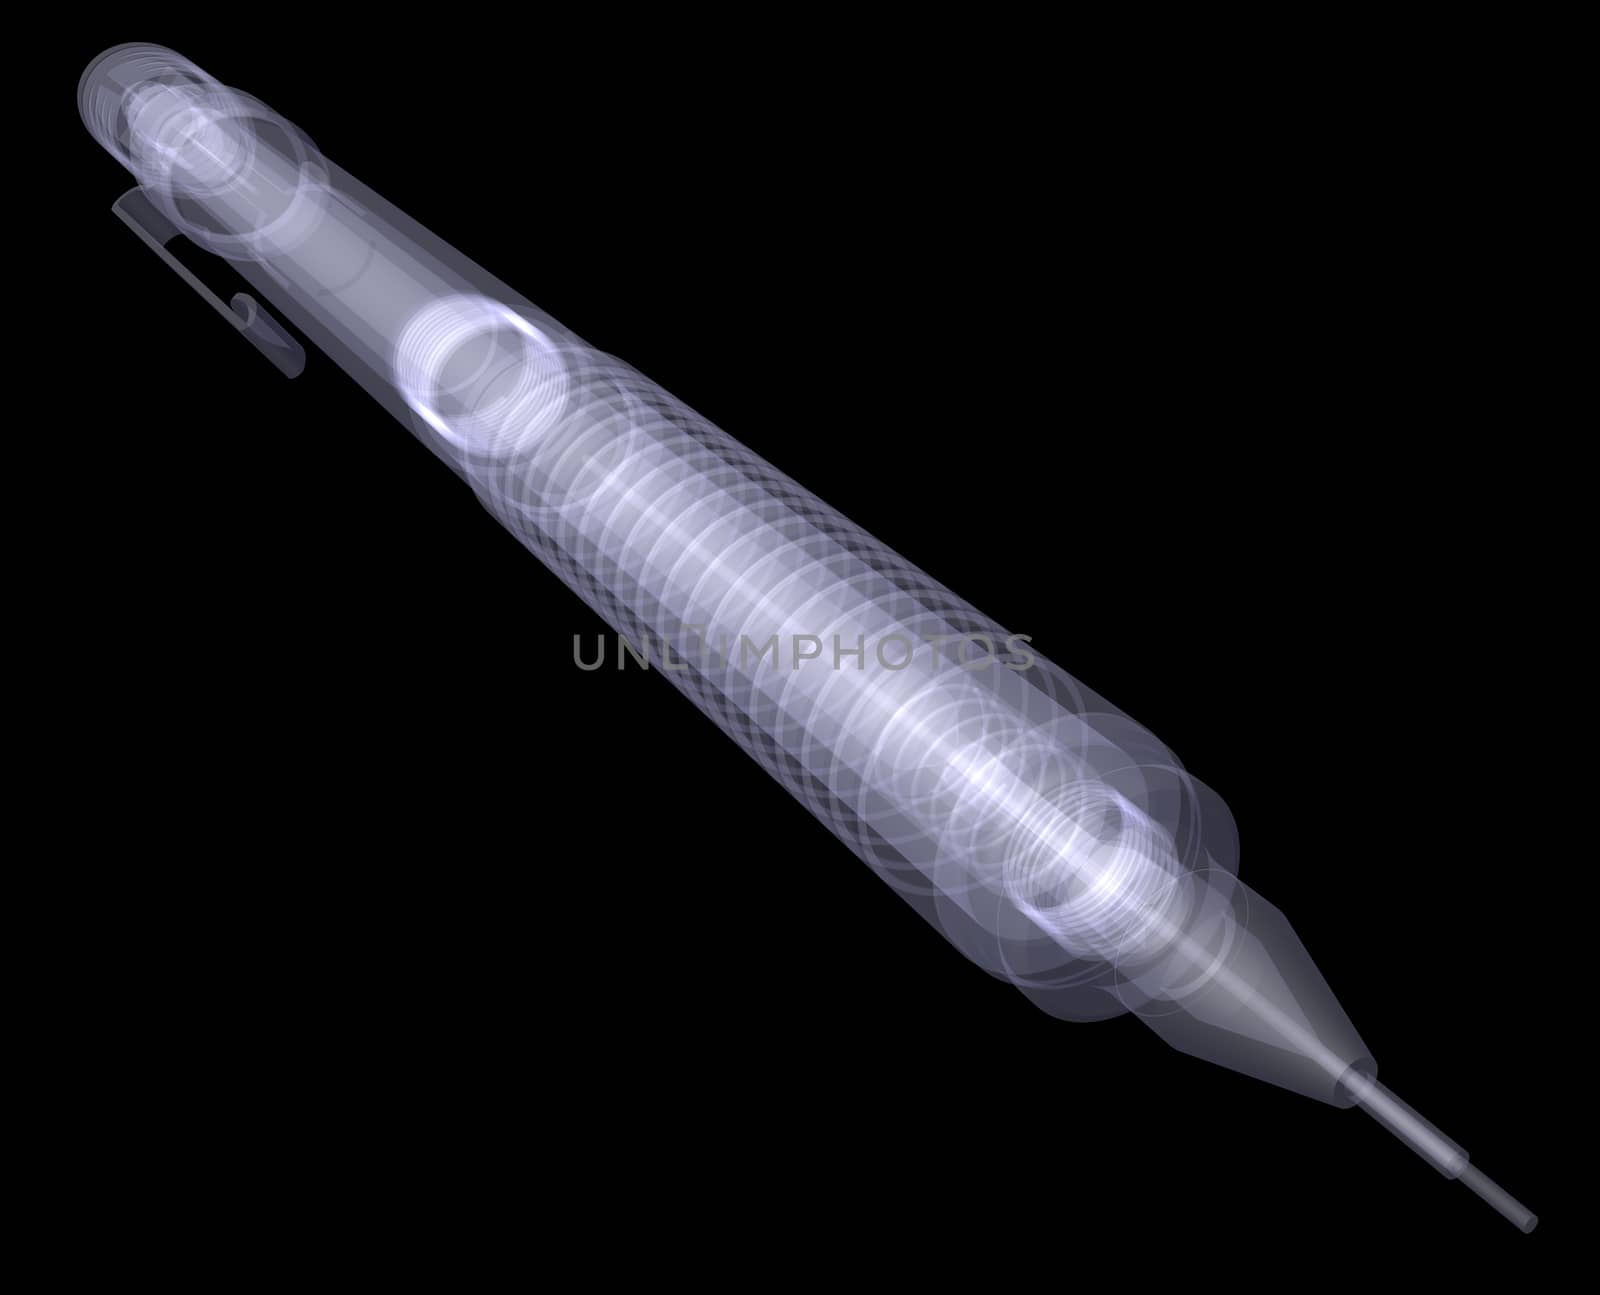 Automatic pencil. X-ray render by cherezoff